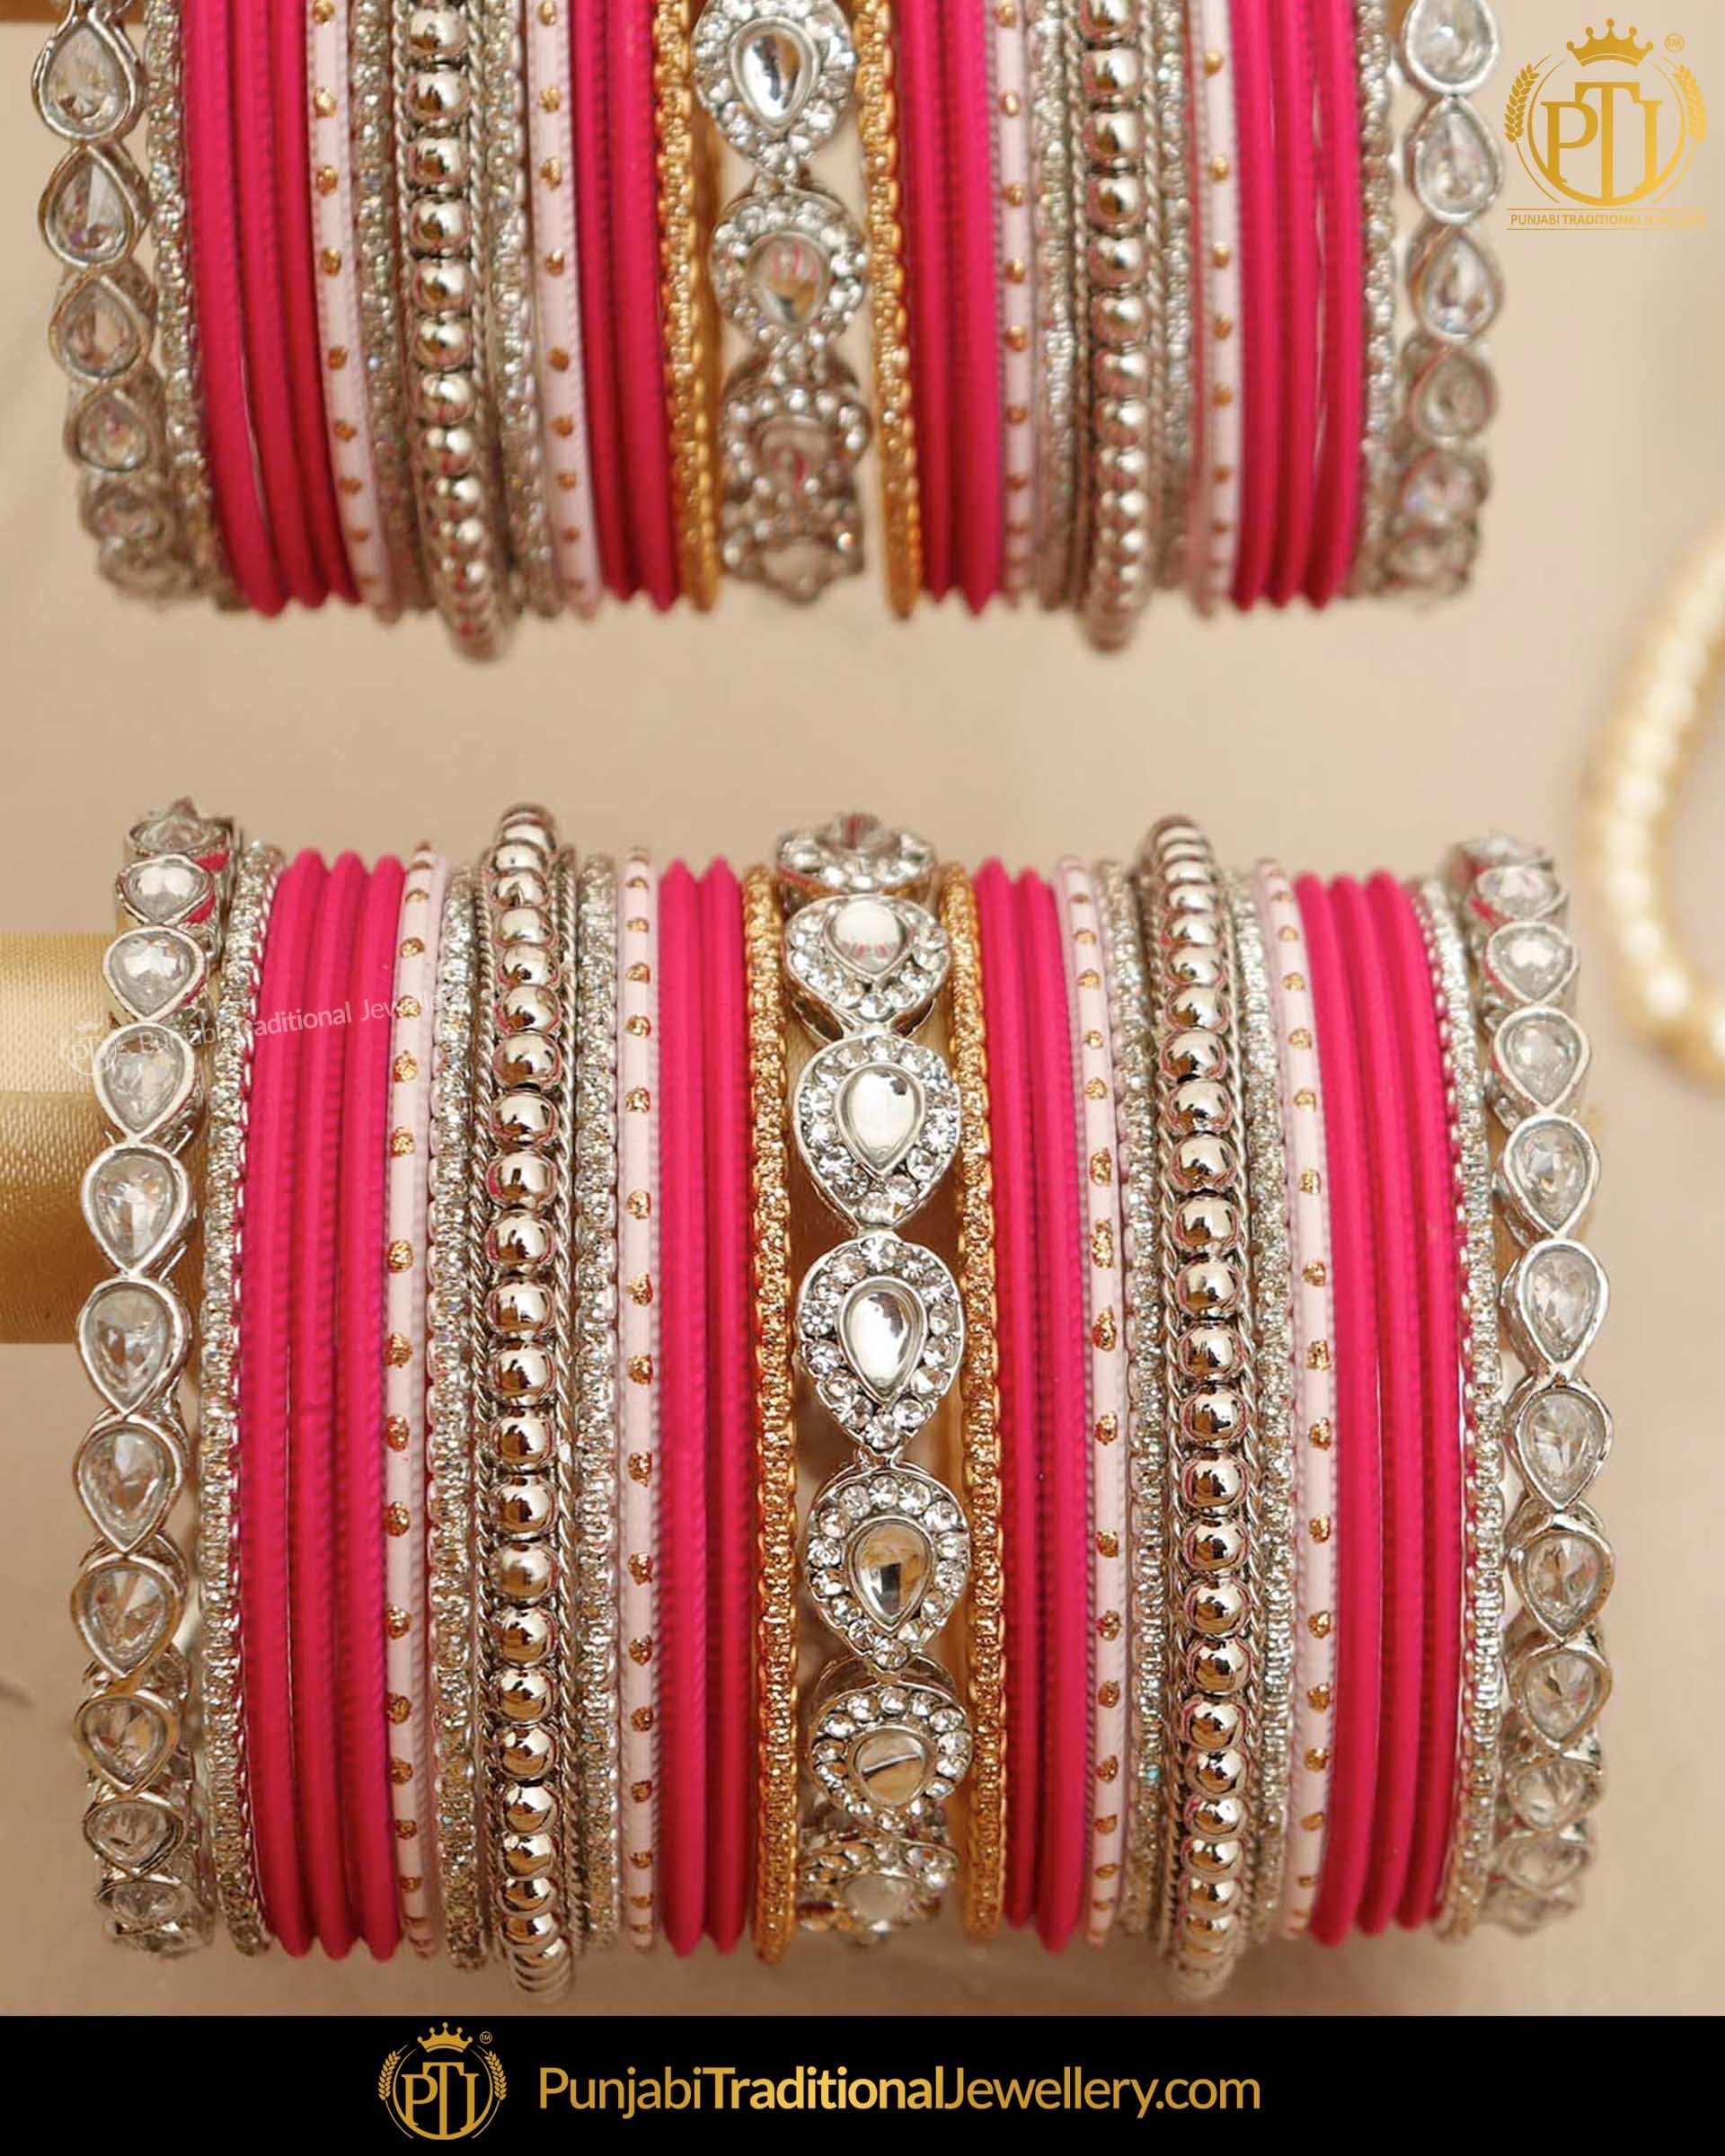 Hot Pink Silver (For Both Hands) Bangles Set | Punjabi Traditional Jewellery Exclusive